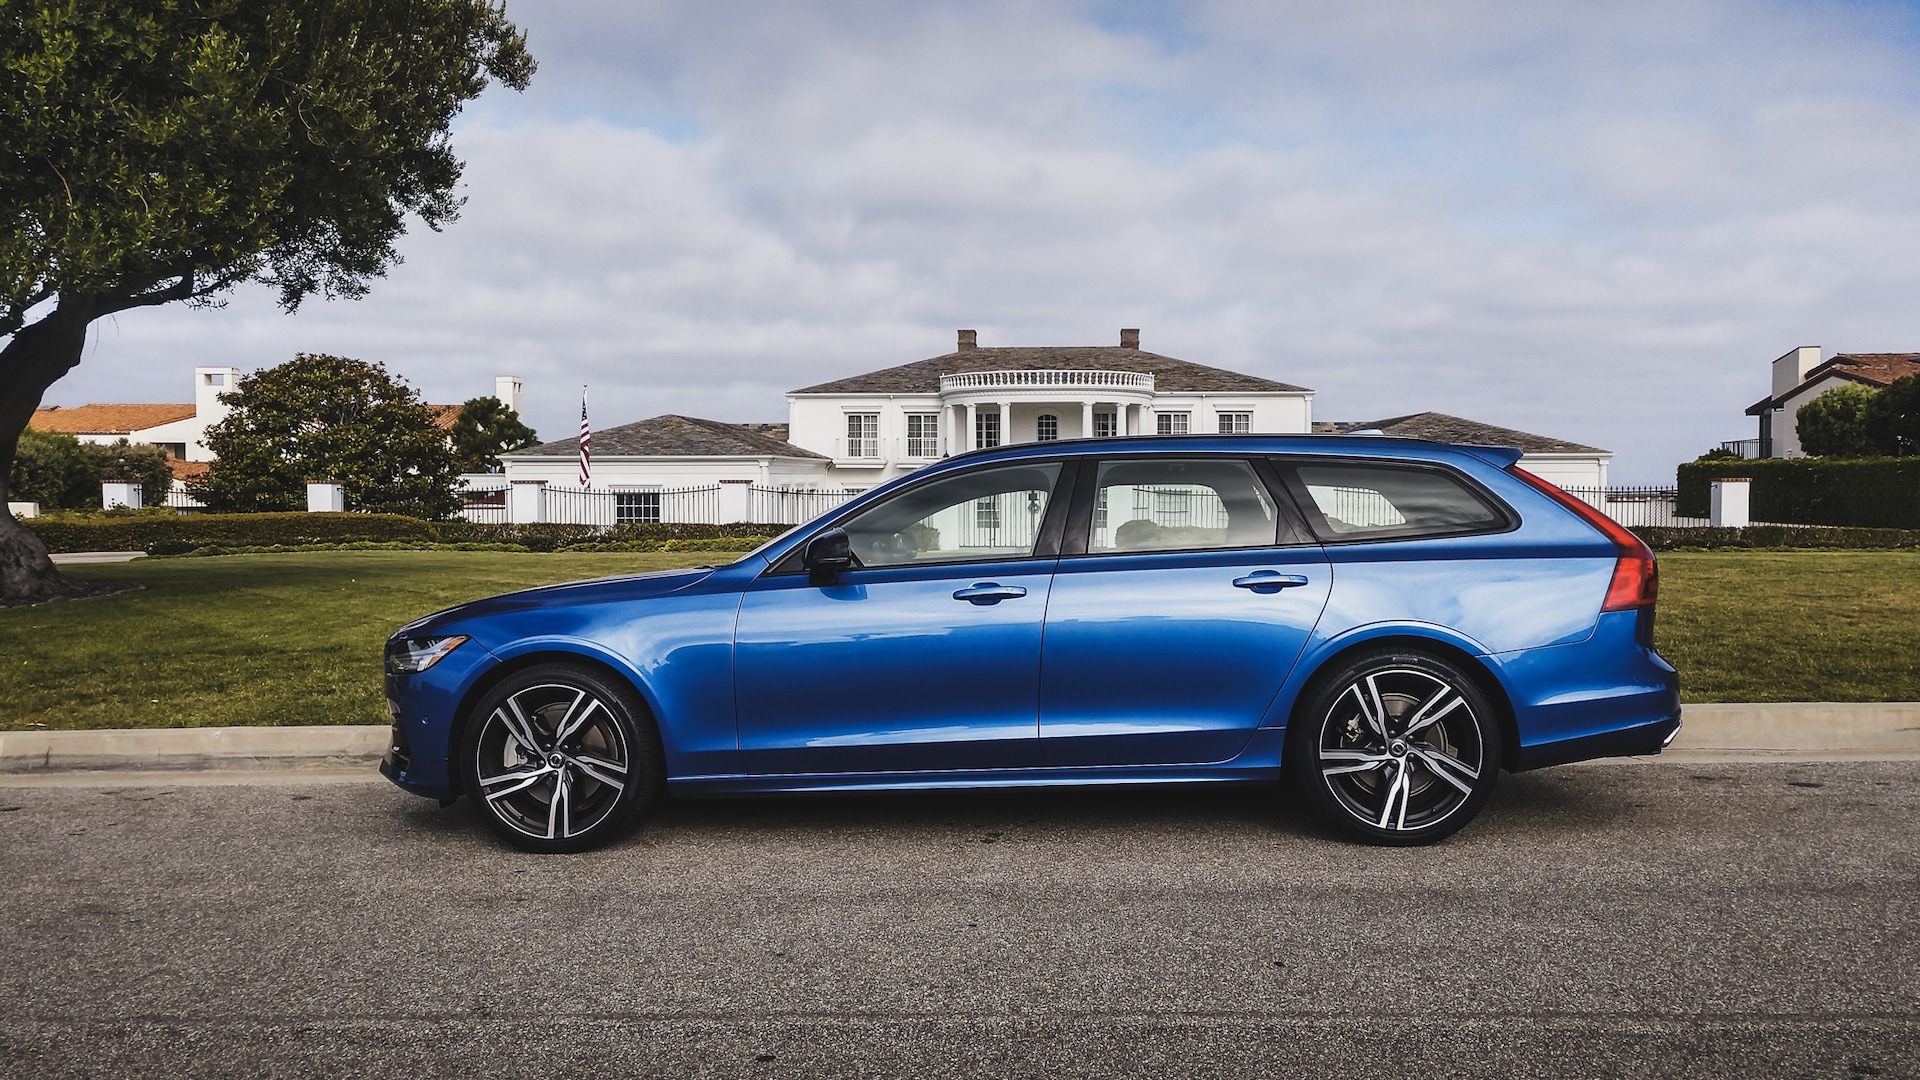 Tested: The 2020 Volvo V90 T6 AWD R-Design Reminds You Why Wagons Rule